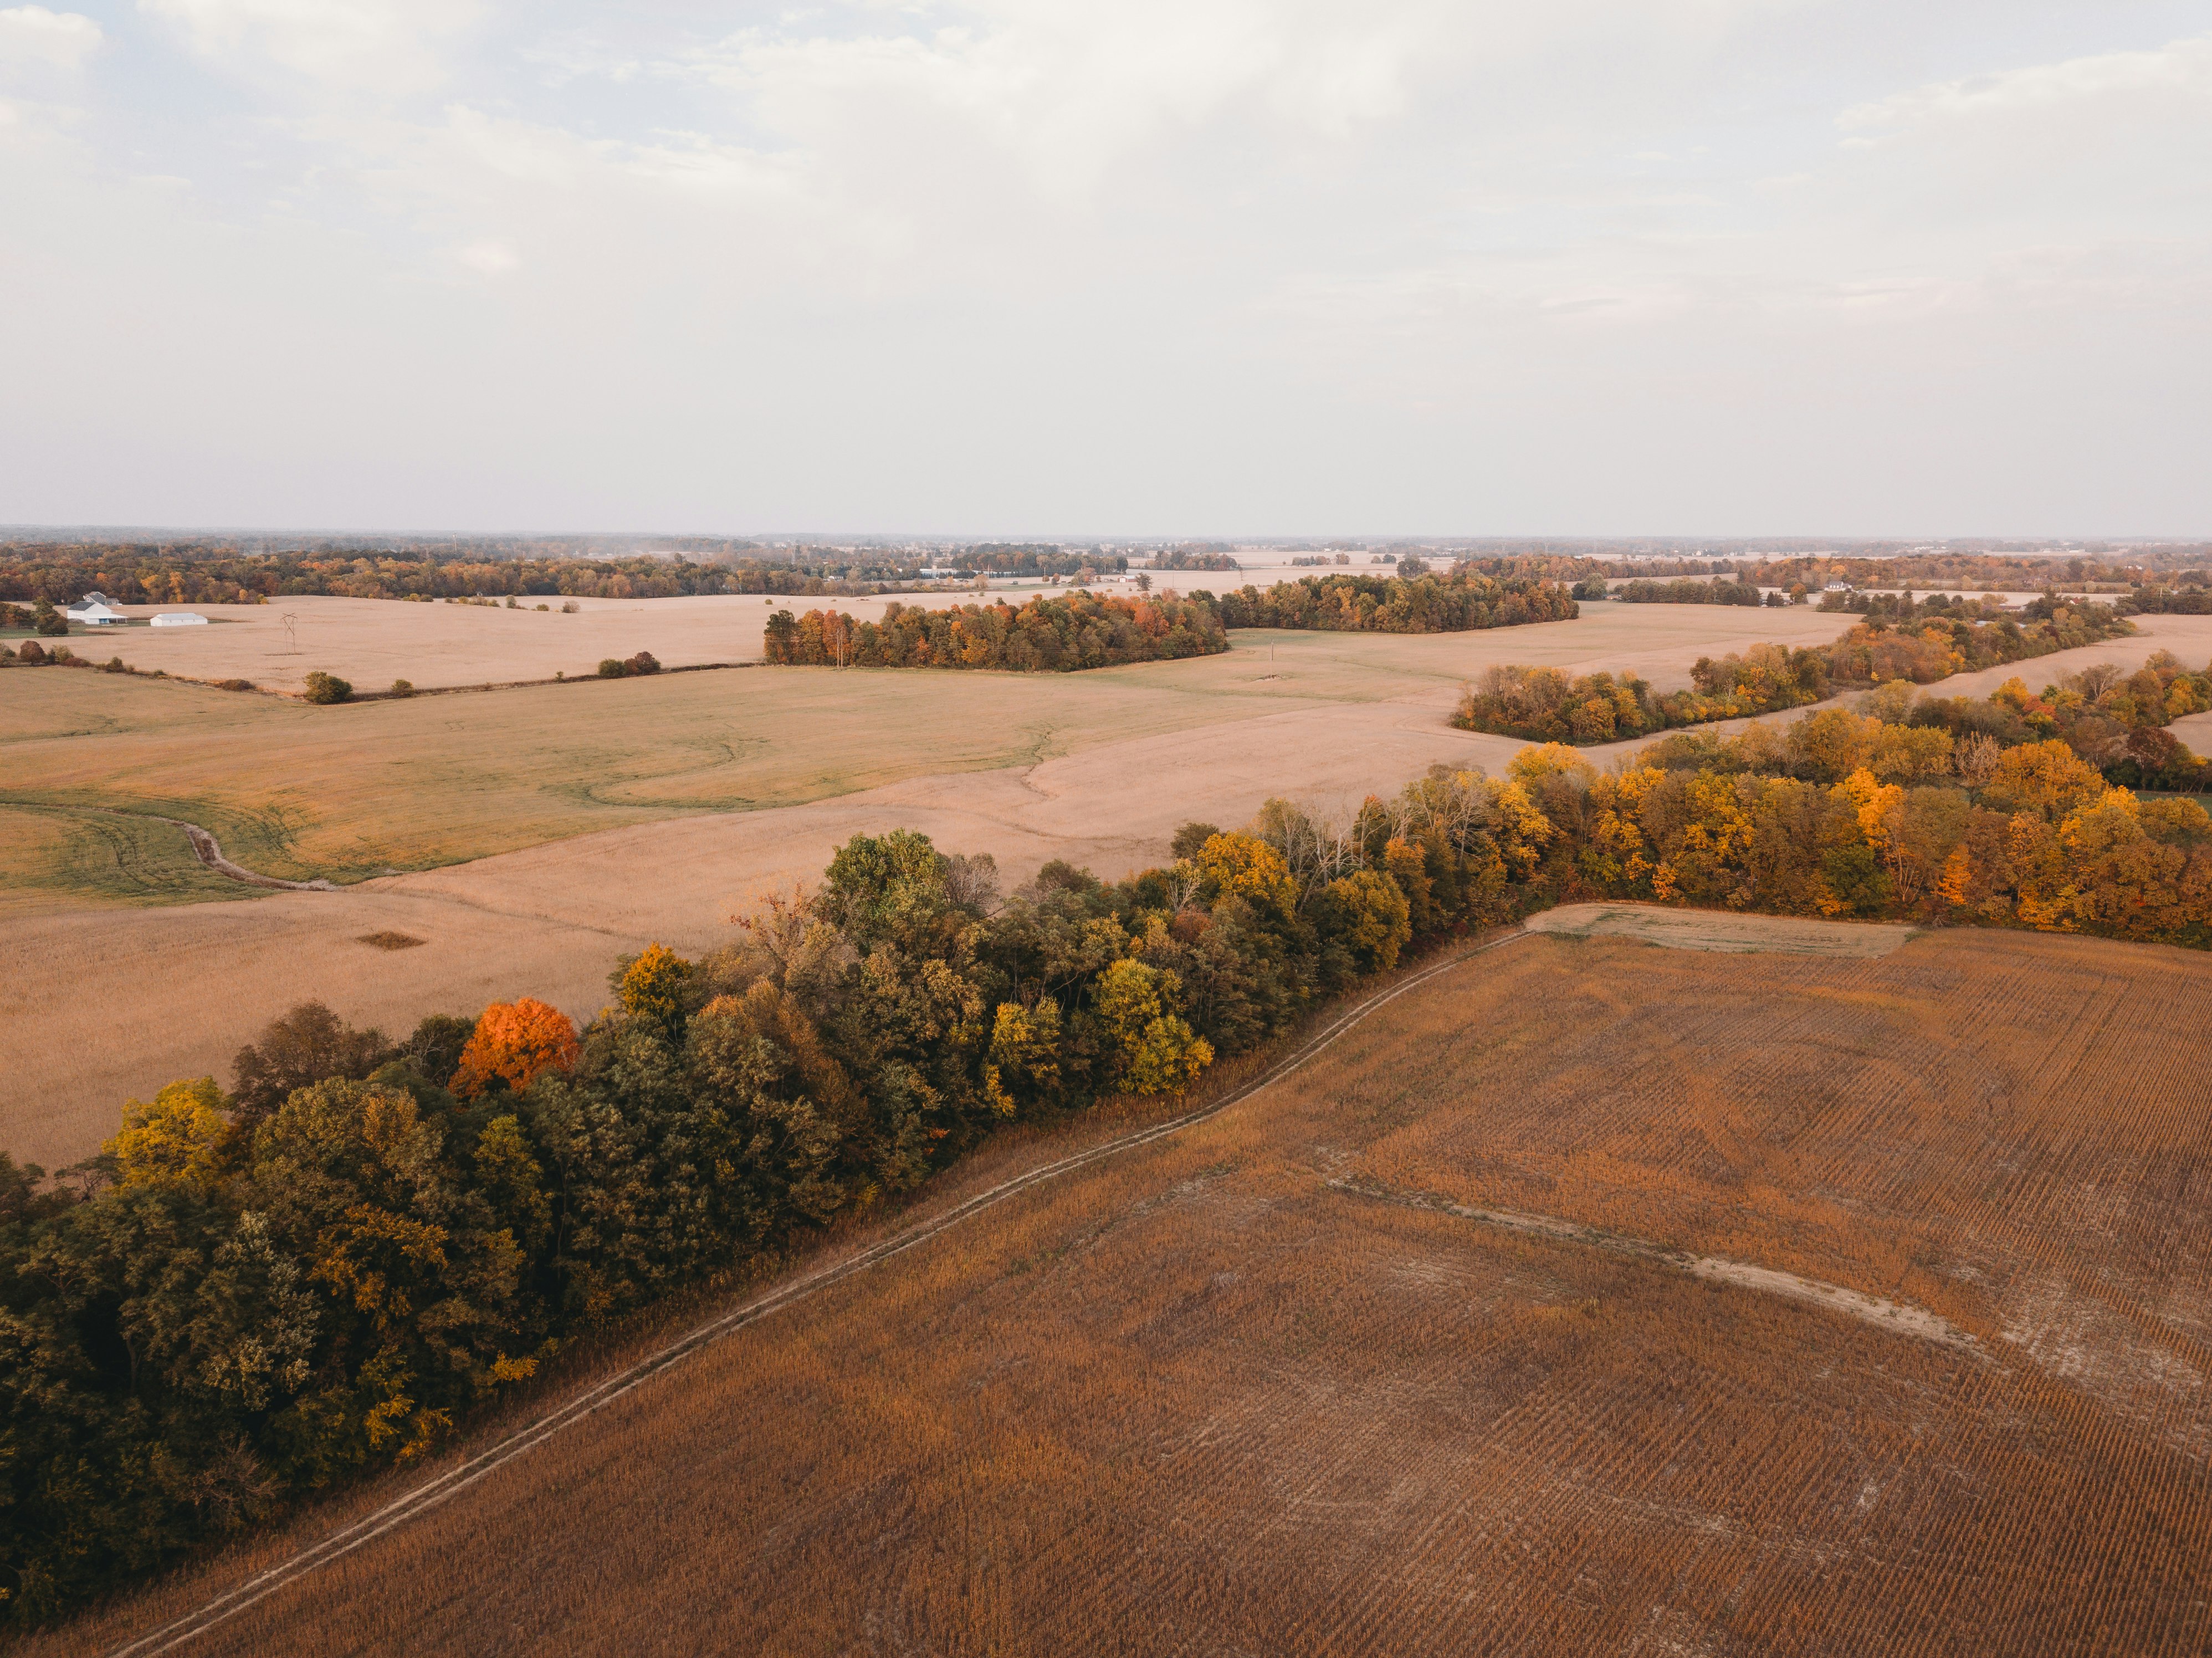 Fields and trees in Noblesville, Indiana. As viewed from a DJI Mavic Pro.